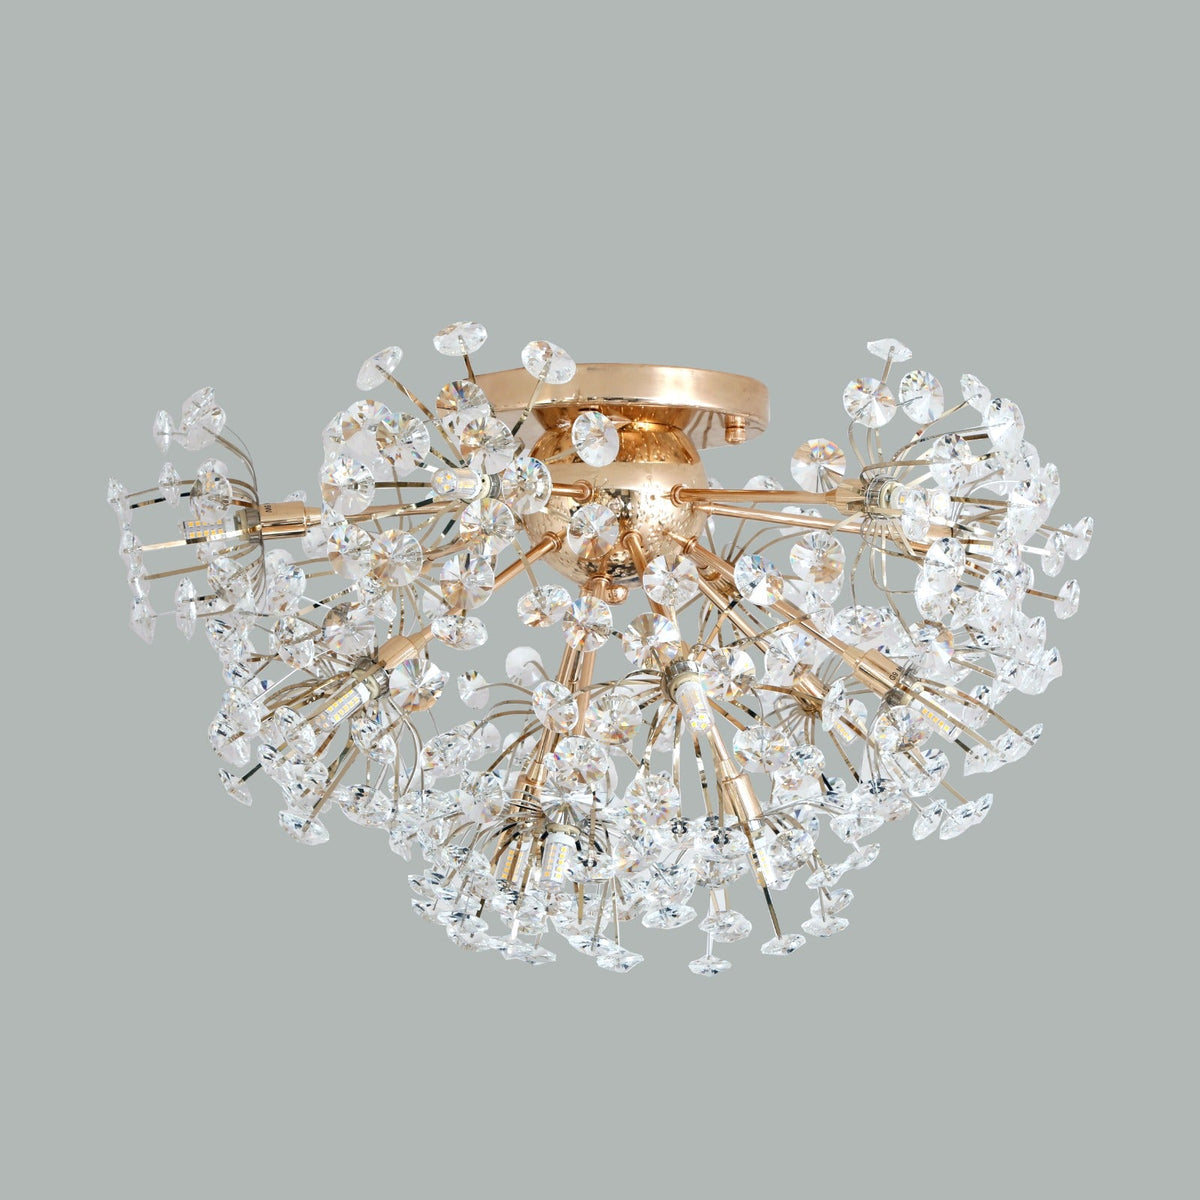 Shop Day Dreaming Ceiling LED Chandelier Ceiling Fixed